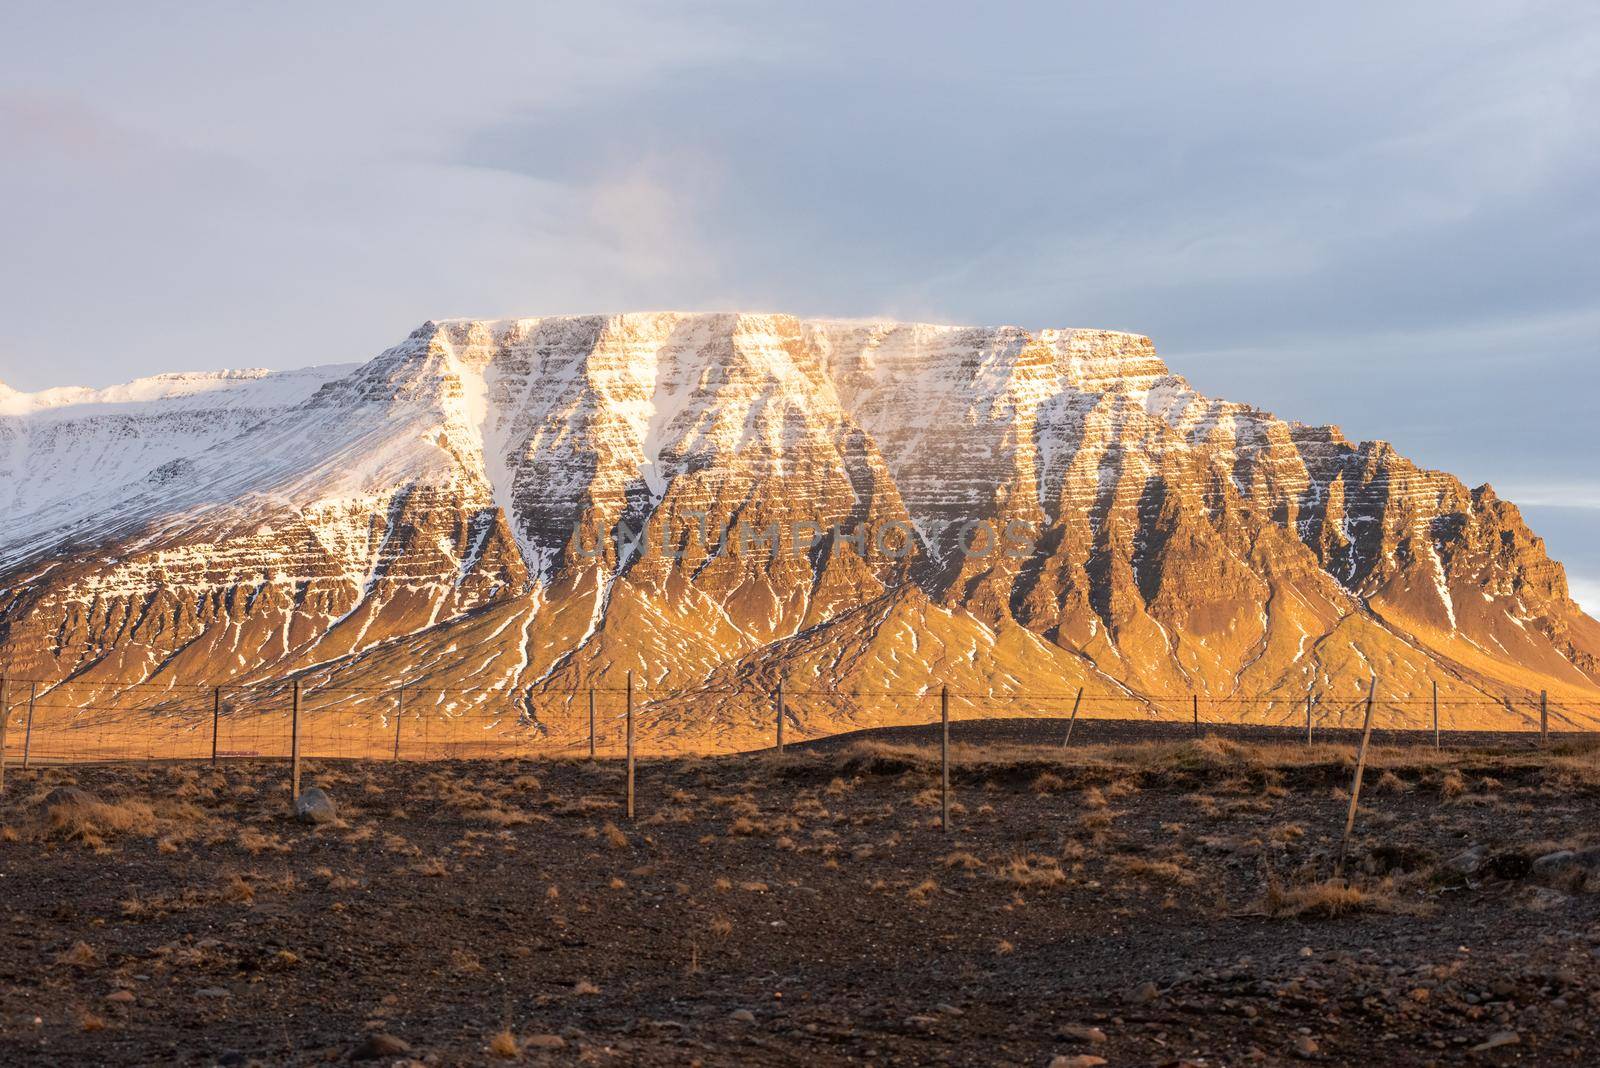 Snow capped mountain in Iceland with magical light casting down heavenly snow drive magical by jyurinko